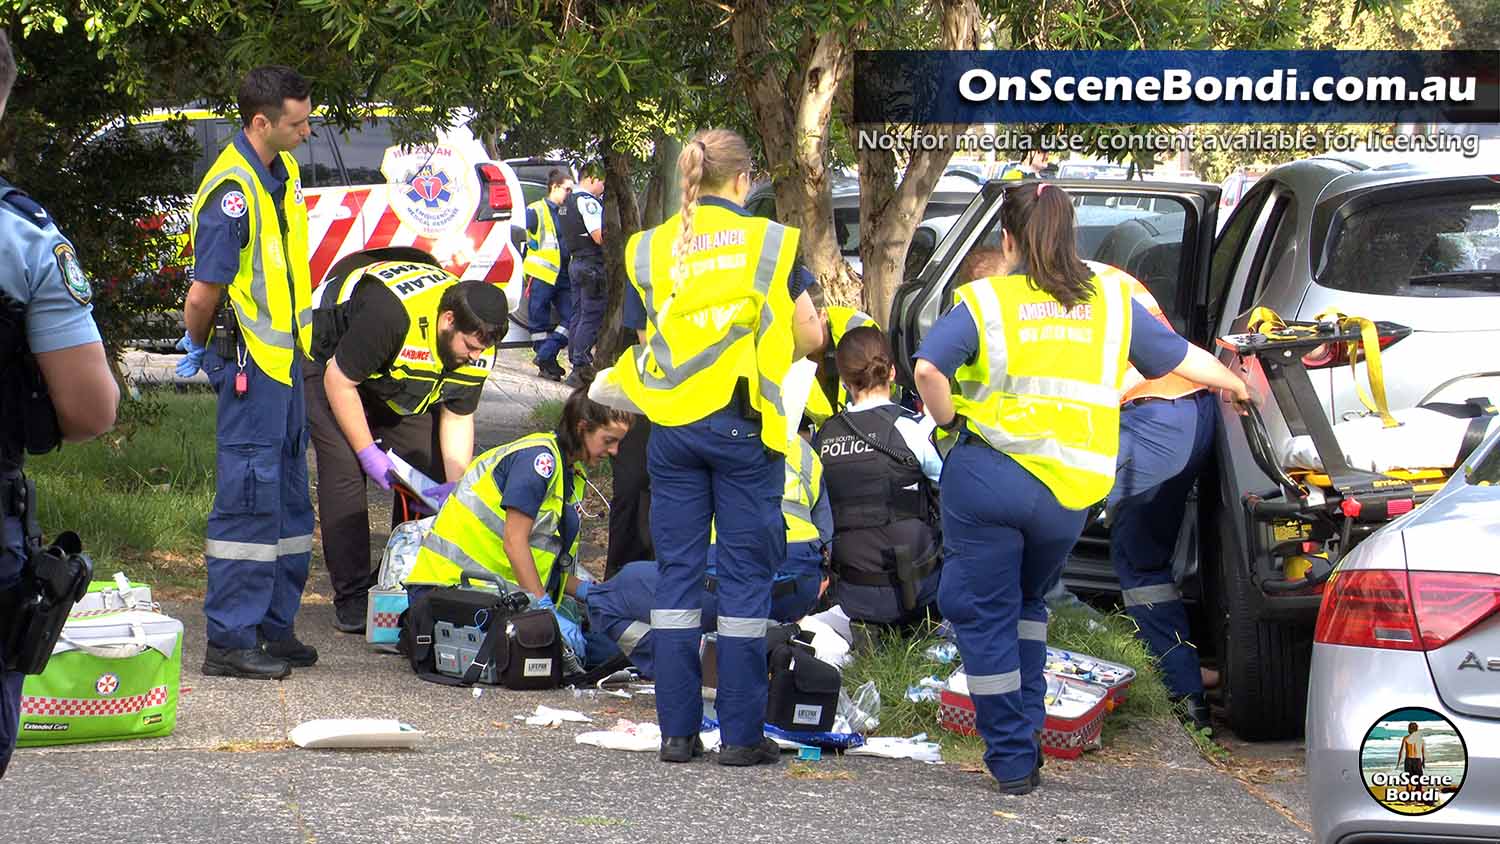 Foot degloved following serious crash in Vaucluse